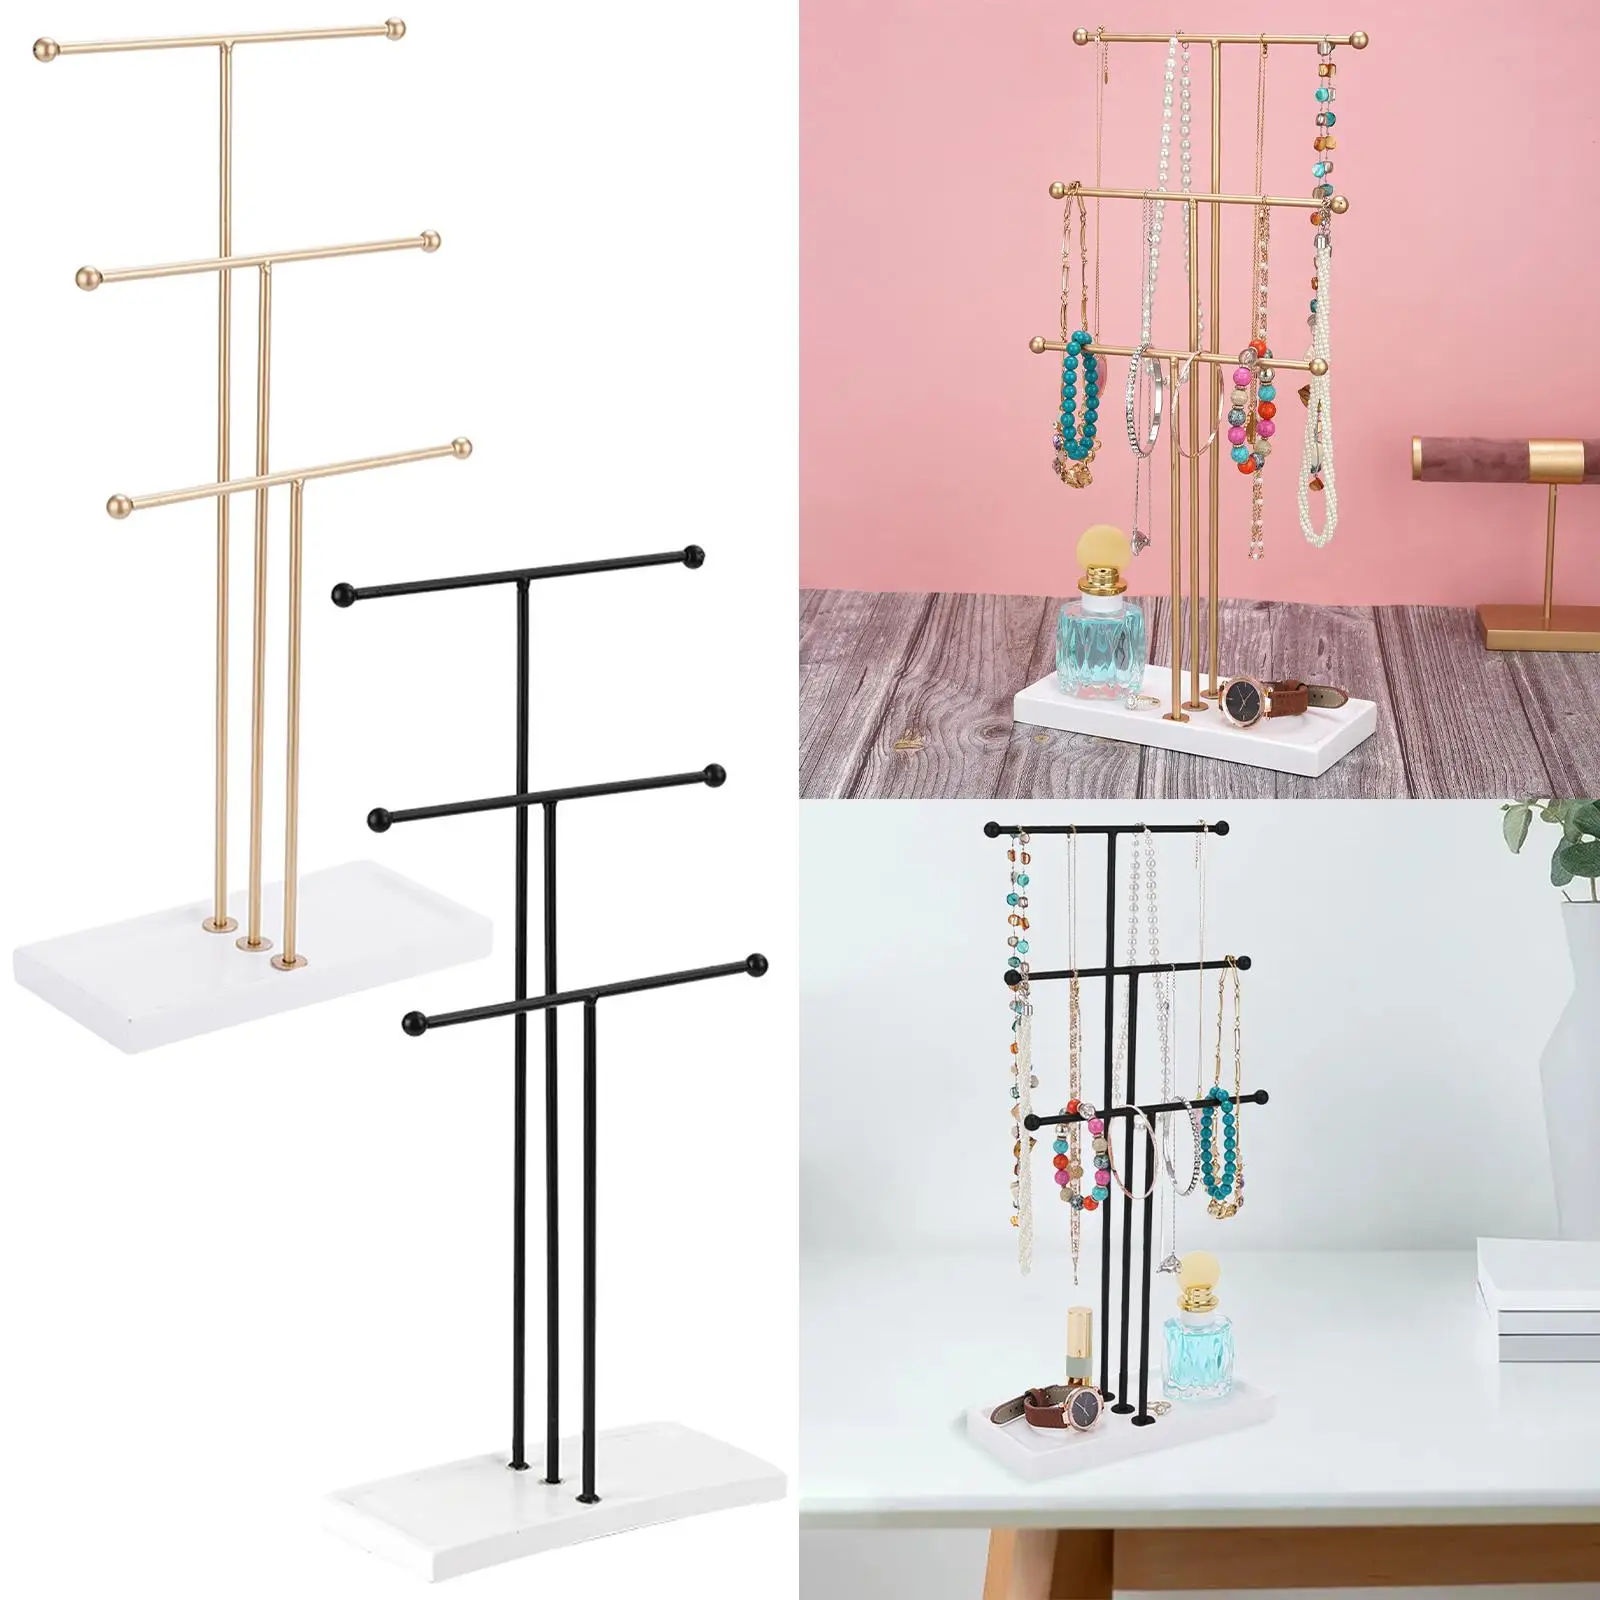 3 Tiers T Bar Jewelry Display Holder Free Standing with Tray Jewelry Organizer for Necklace Chains Home Decor Jewelry Organizer